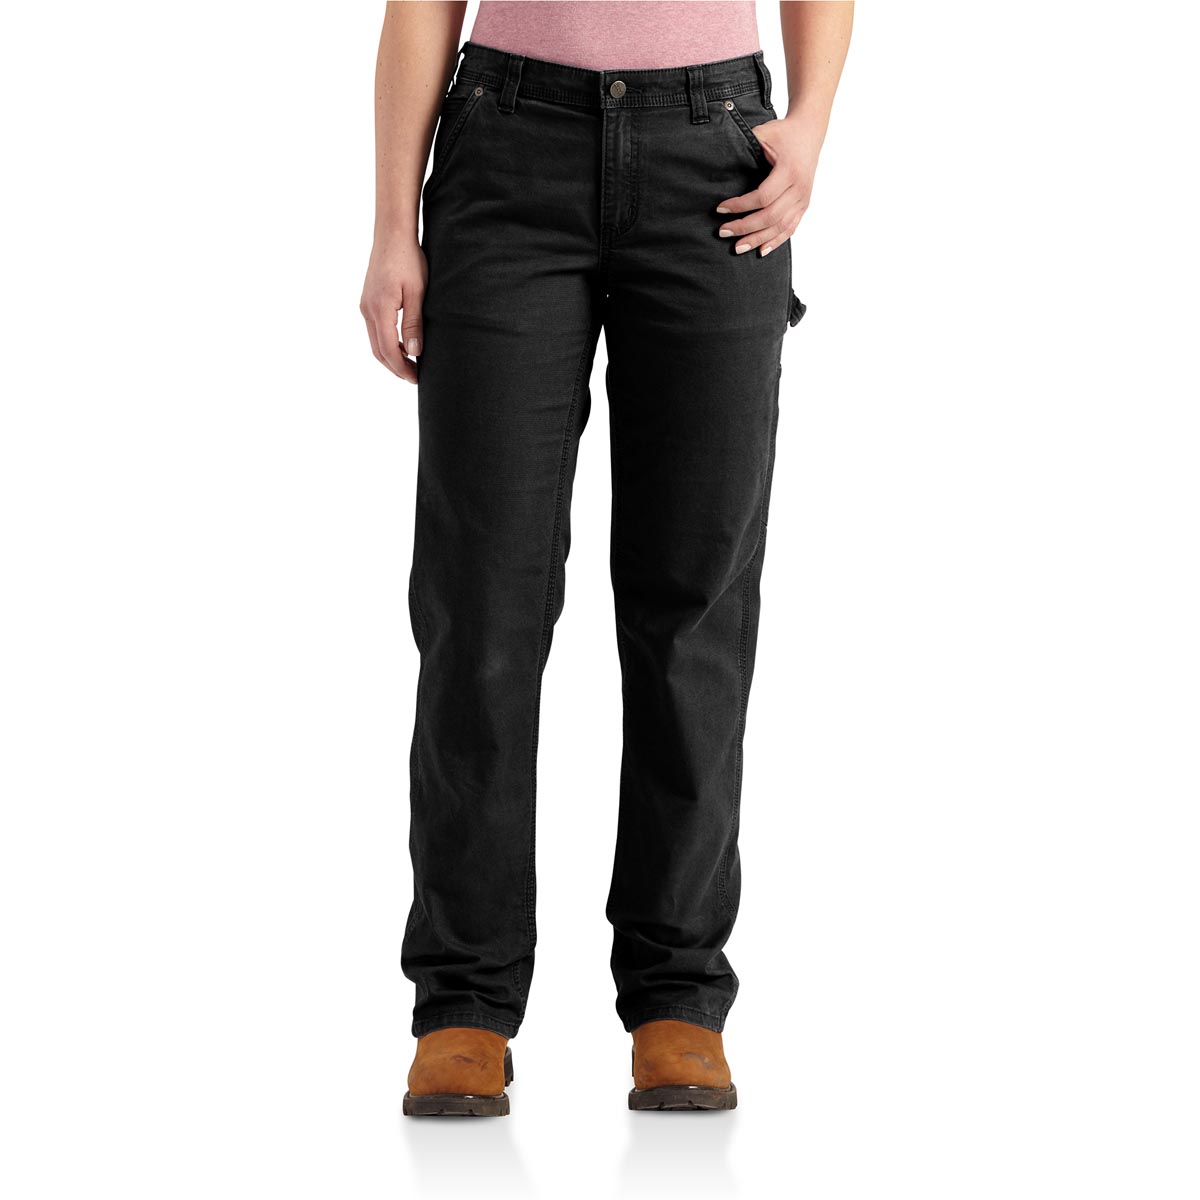 Women's Rugged Flex Loose Fit Canvas Work Pant